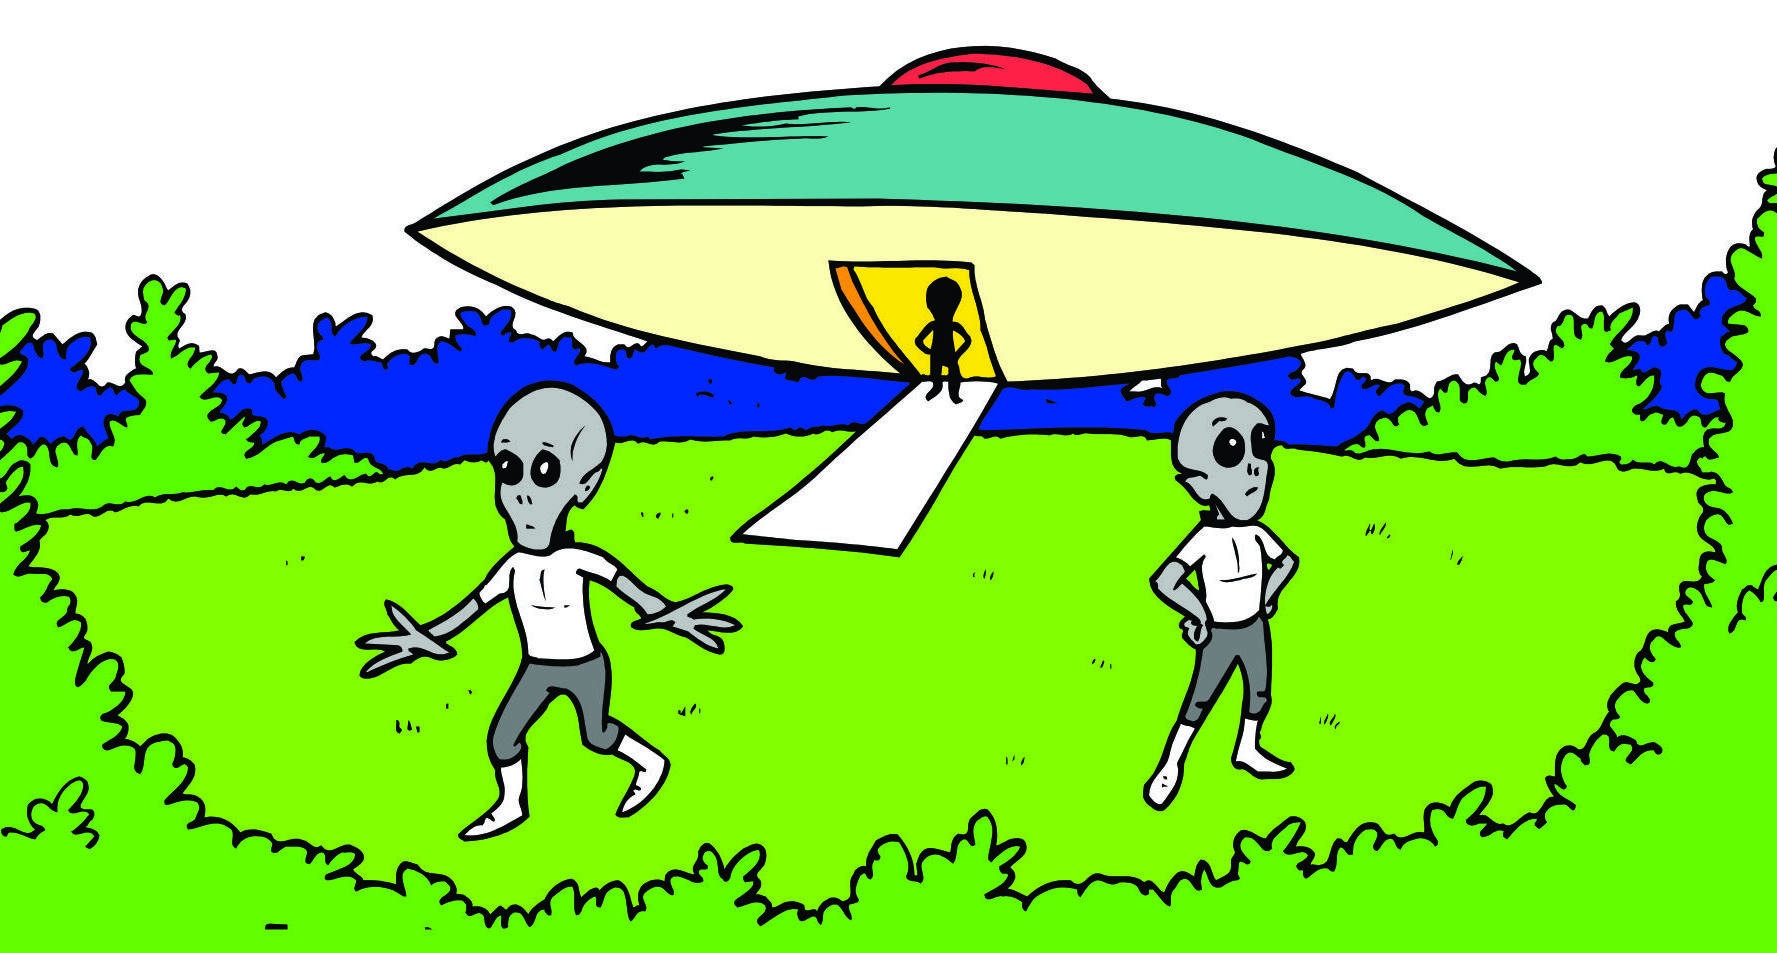 Images For > Clip Art Spaceship